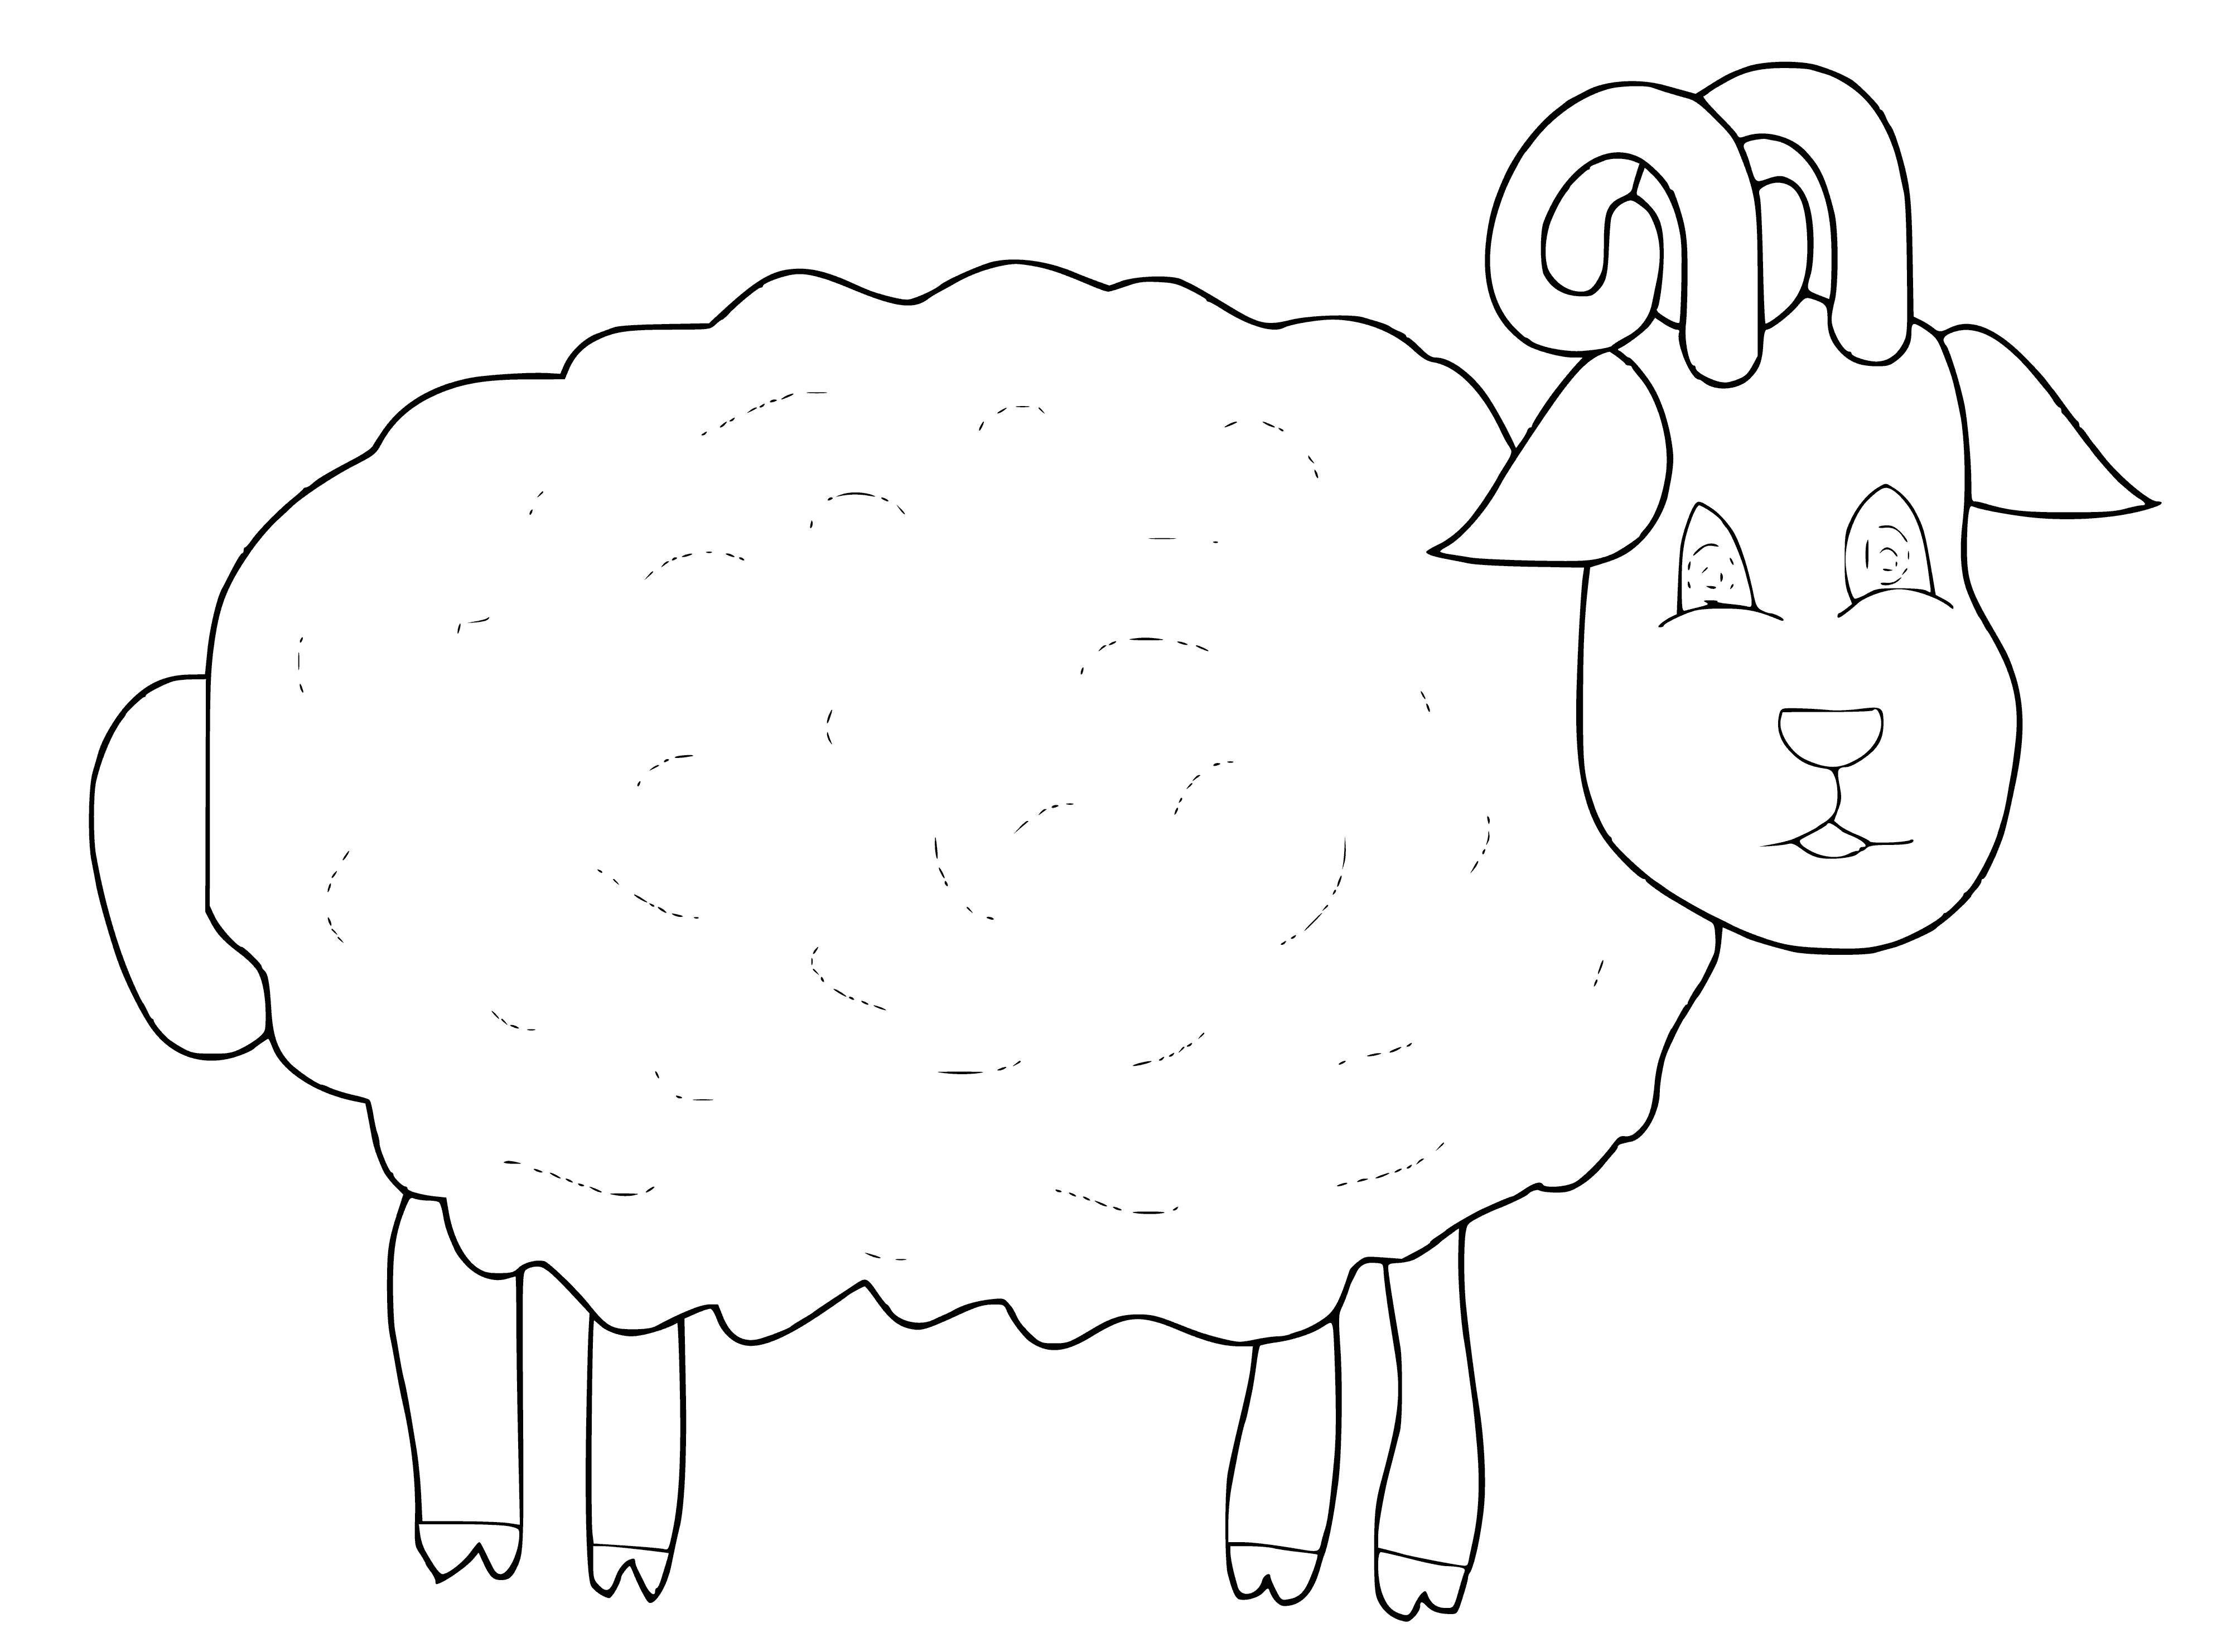 coloring page: A white lamb w/ black nose, floppy ears, and curly tail eating grass in the center of the coloring page.